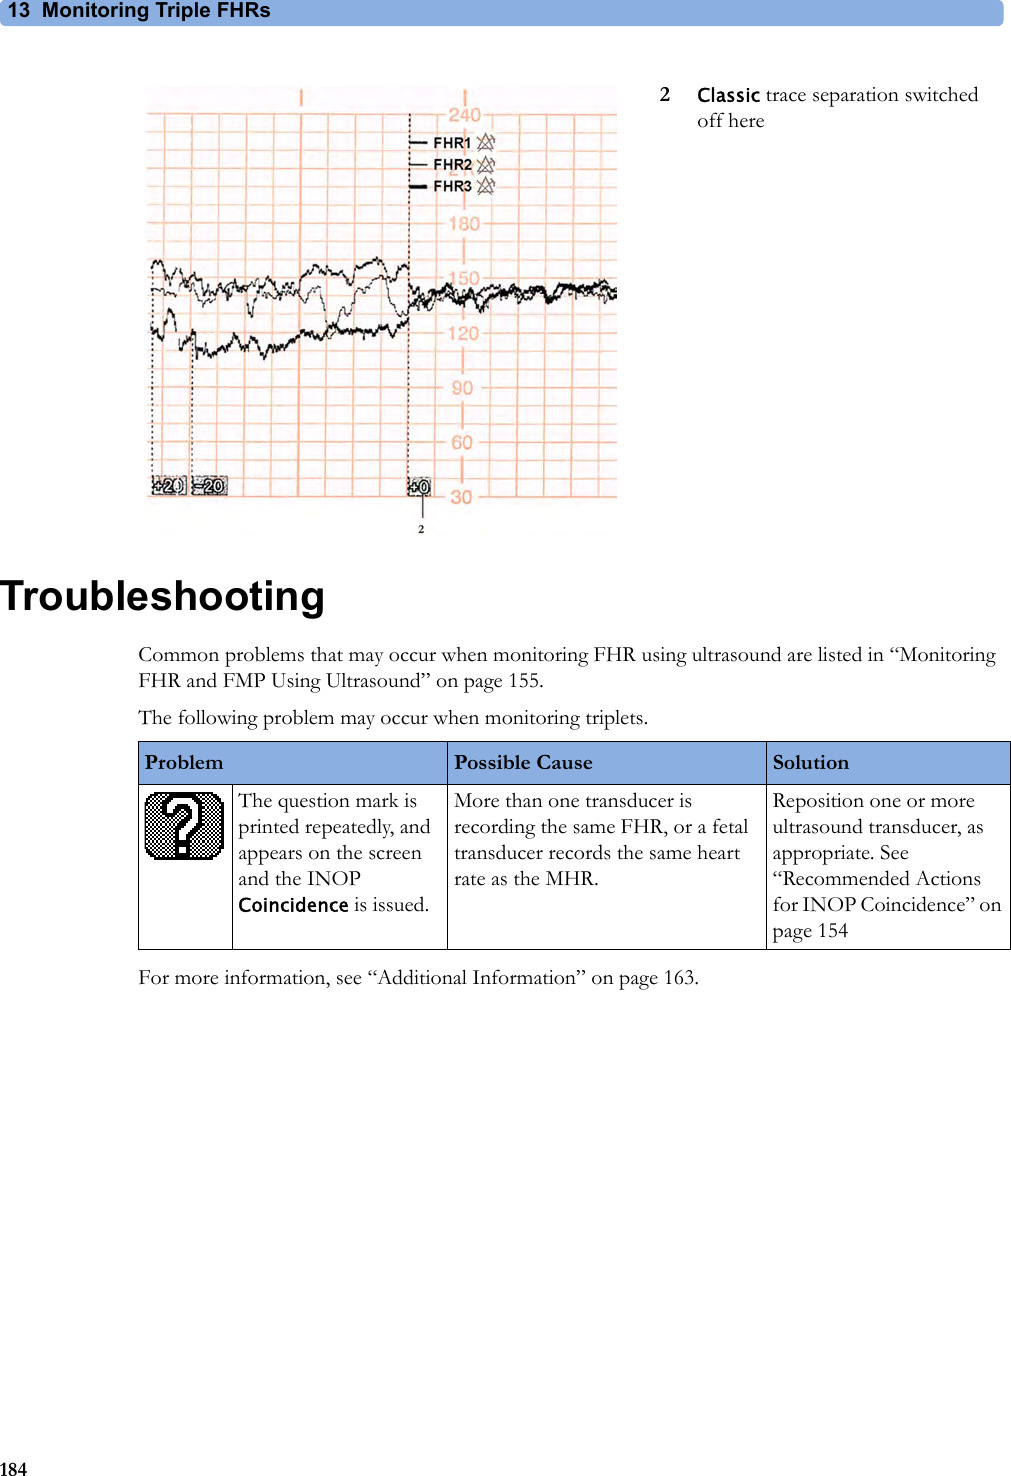 13 Monitoring Triple FHRs184TroubleshootingCommon problems that may occur when monitoring FHR using ultrasound are listed in “Monitoring FHR and FMP Using Ultrasound” on page 155.The following problem may occur when monitoring triplets.For more information, see “Additional Information” on page 163.2Classic trace separation switched off hereProblem Possible Cause SolutionThe question mark is printed repeatedly, and appears on the screen and the INOP Coincidence is issued.More than one transducer is recording the same FHR, or a fetal transducer records the same heart rate as the MHR.Reposition one or more ultrasound transducer, as appropriate. See “Recommended Actions for INOP Coincidence” on page 154